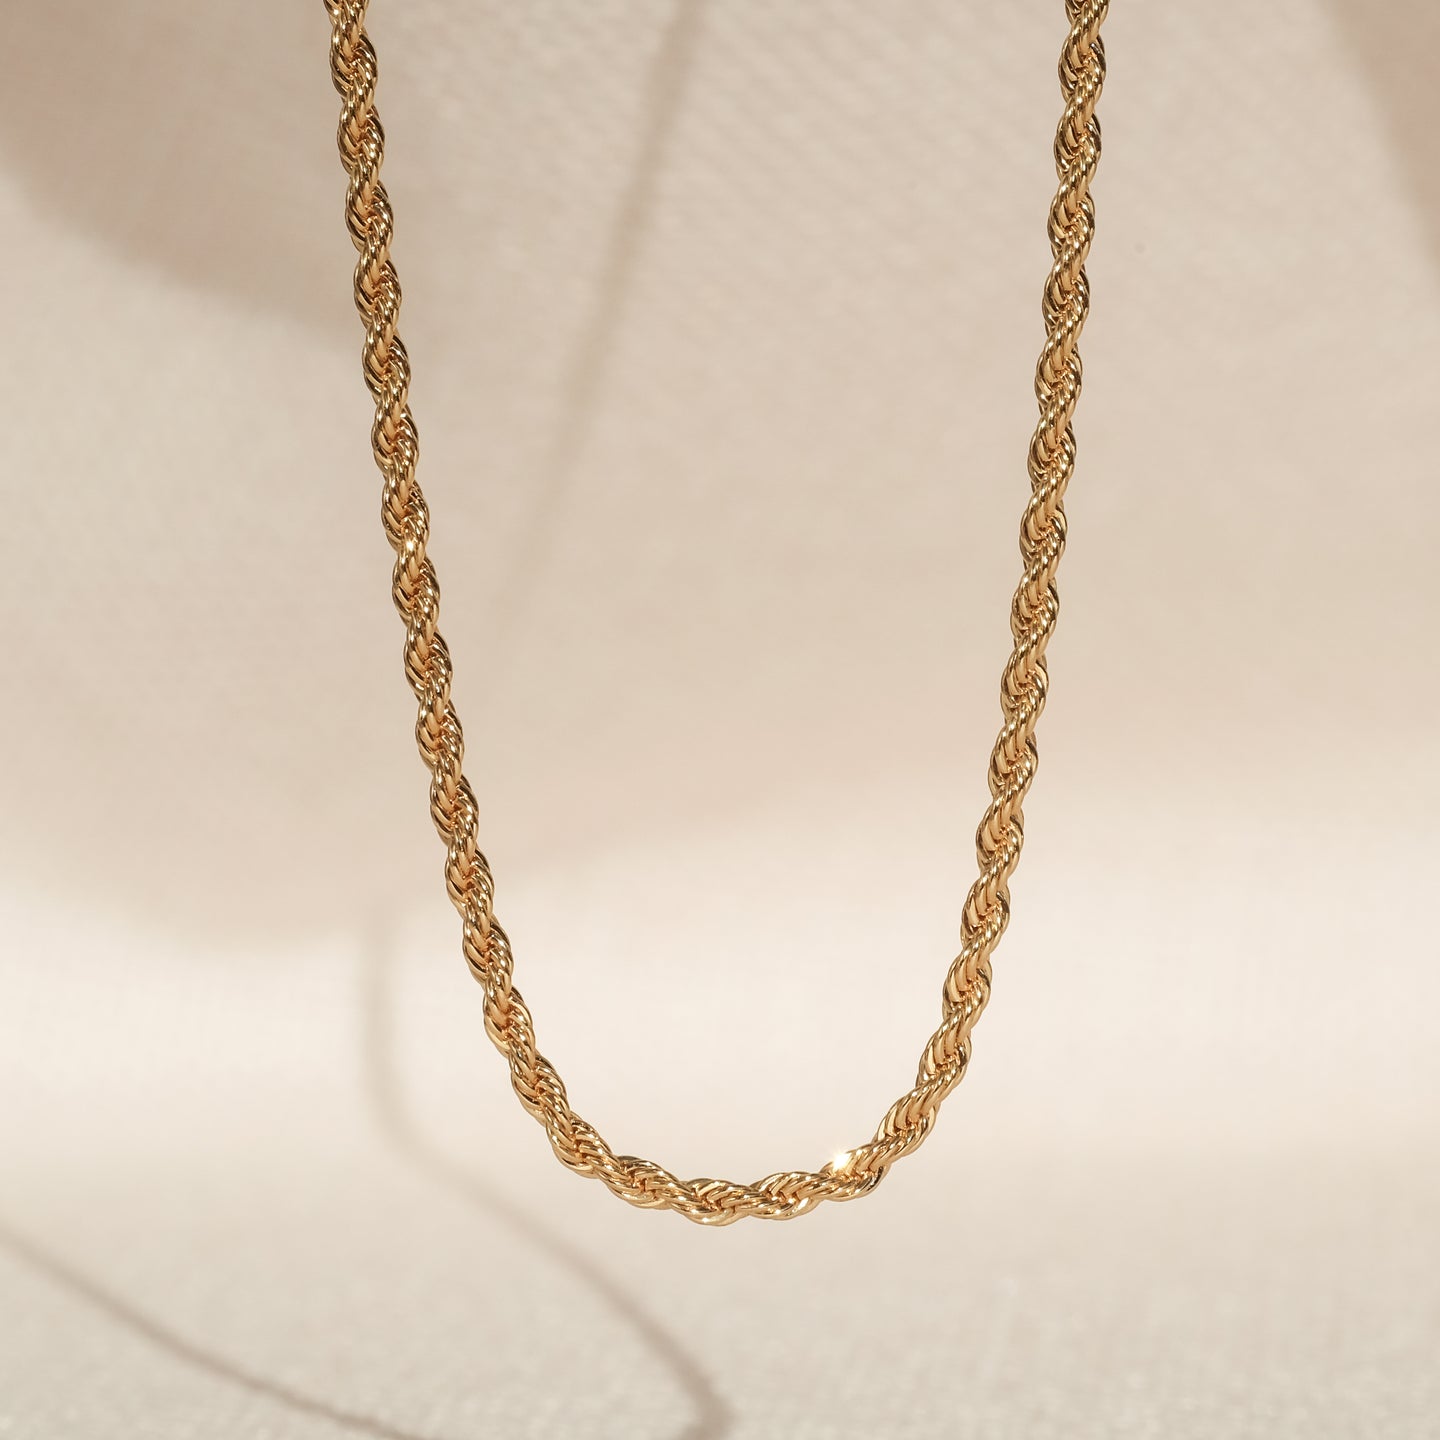 products/kaimo-necklace-18k-gold-plated-brass-1.jpg